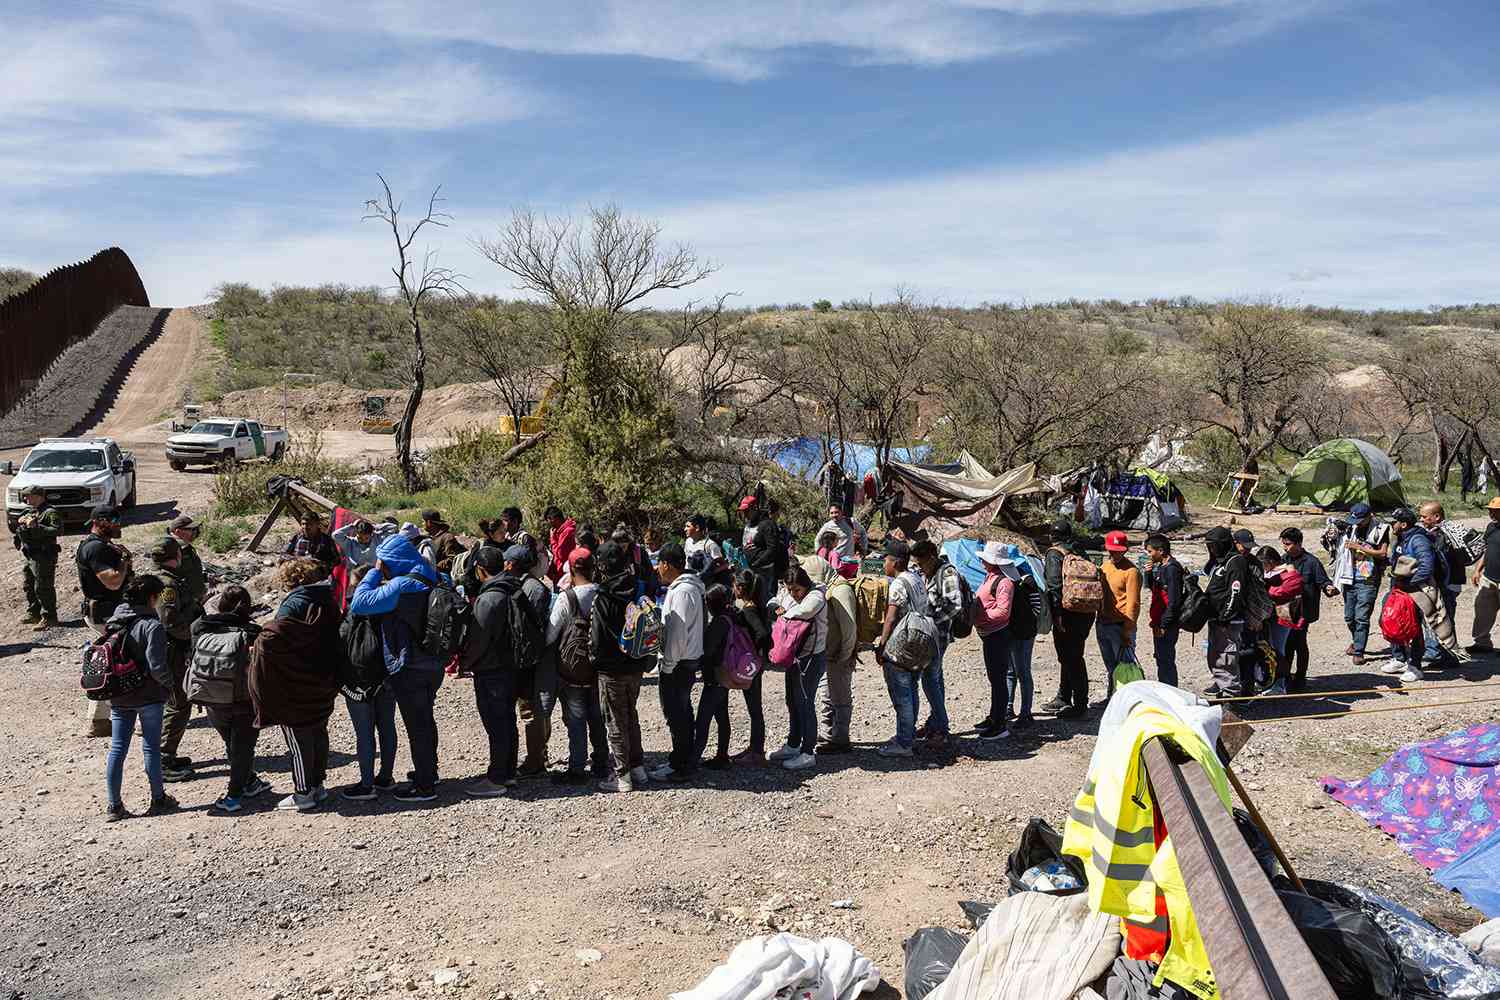 Illegal Border Crossings Drop for 5th Straight Month, Reaching Lowest Levels Since Joe Biden Took Office